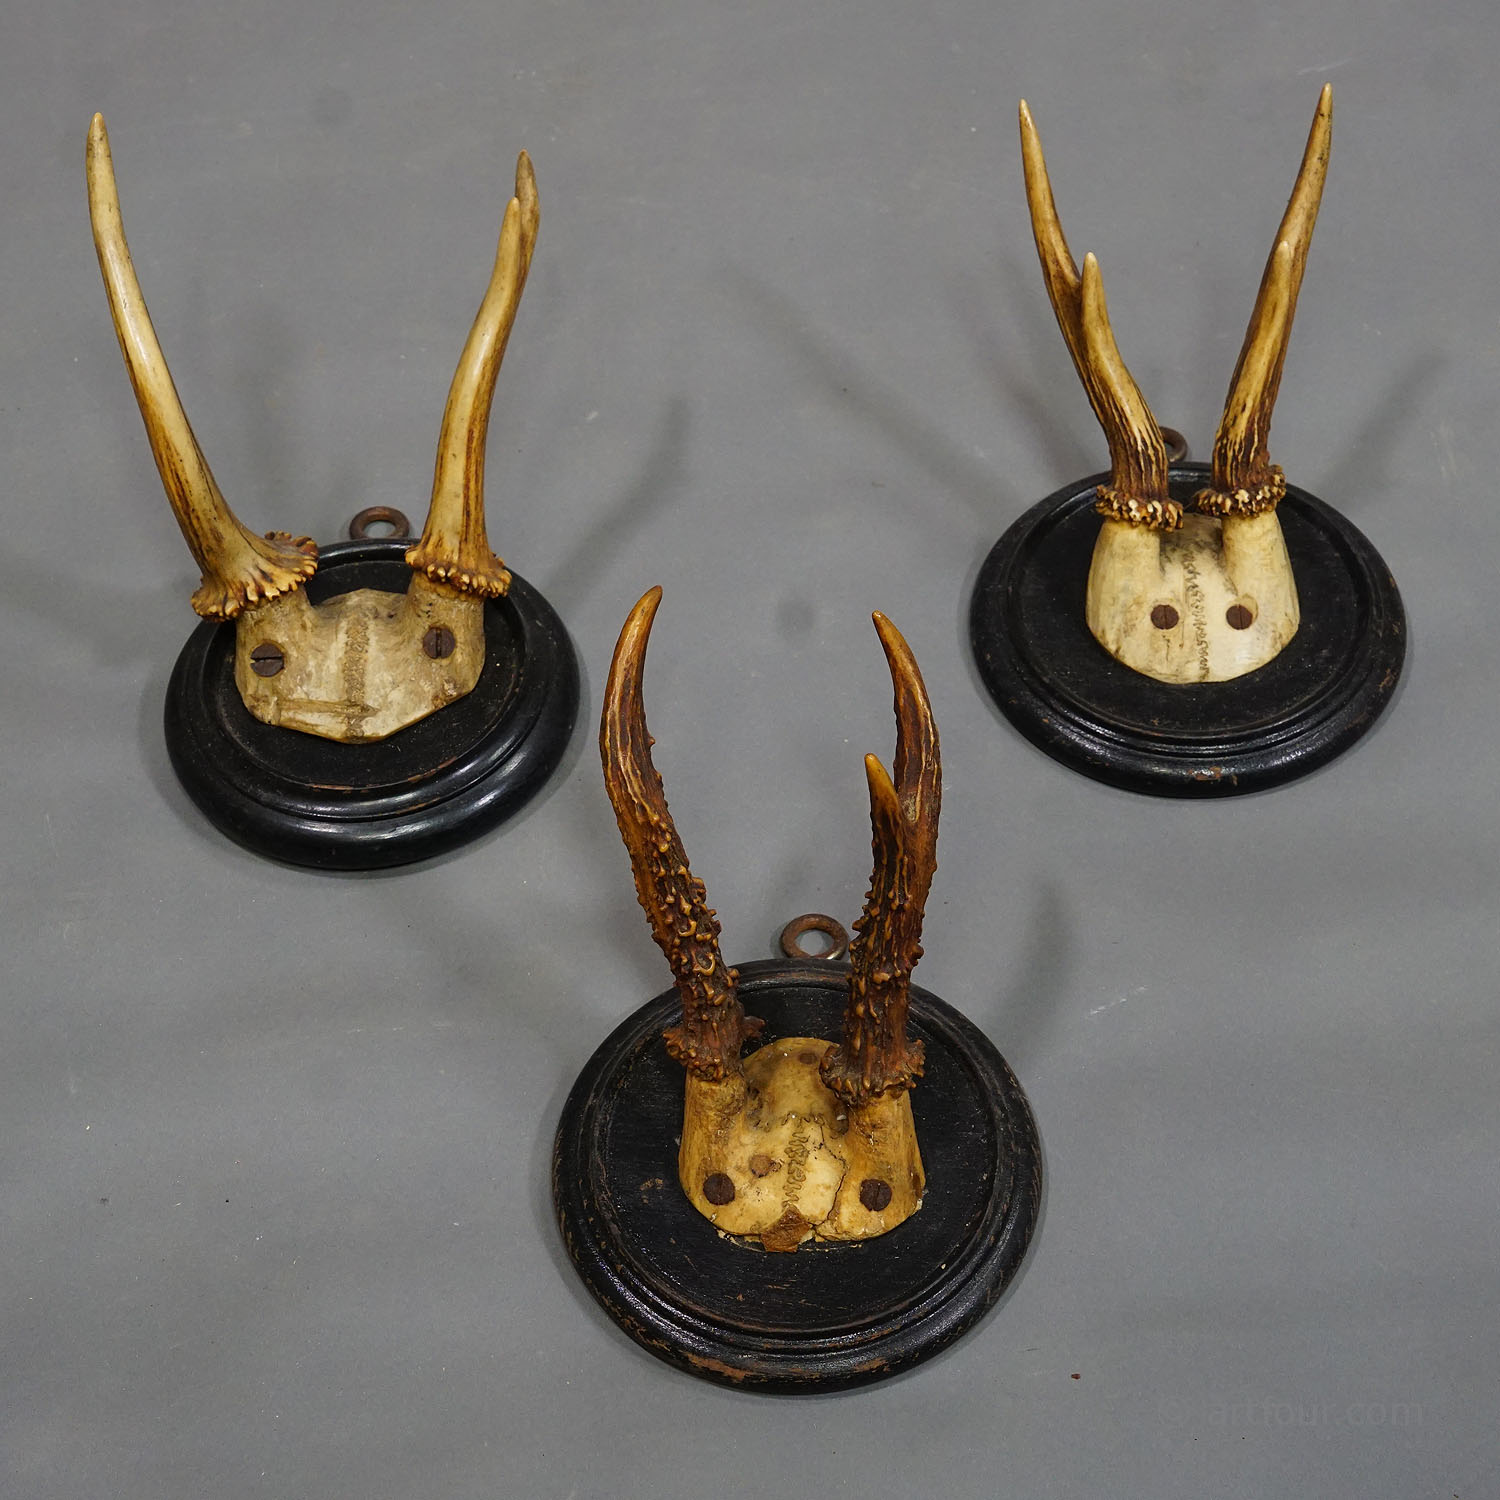 Six Antique Deer Trophies on Wooden Plaques Germany ca. 1900s